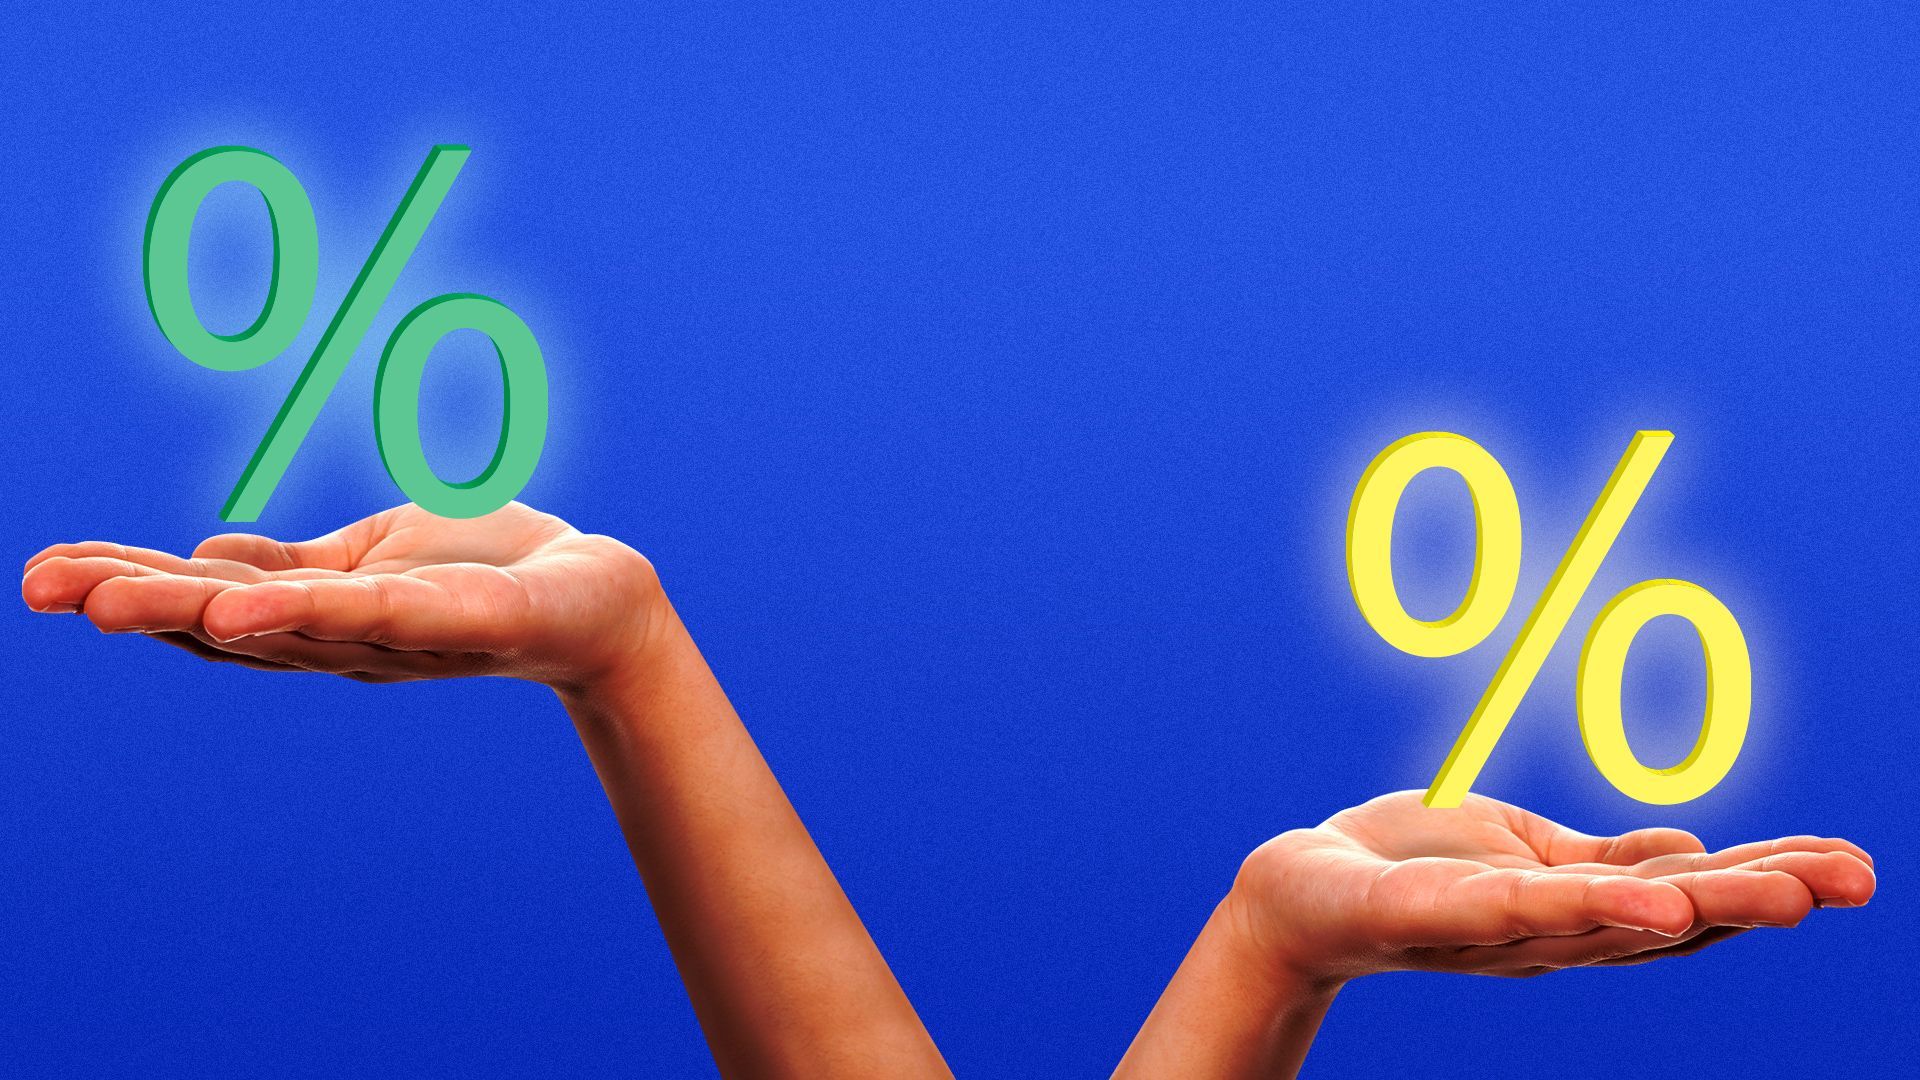 Illustration of two hands holding percentage icons, one hand is higher than the other. 